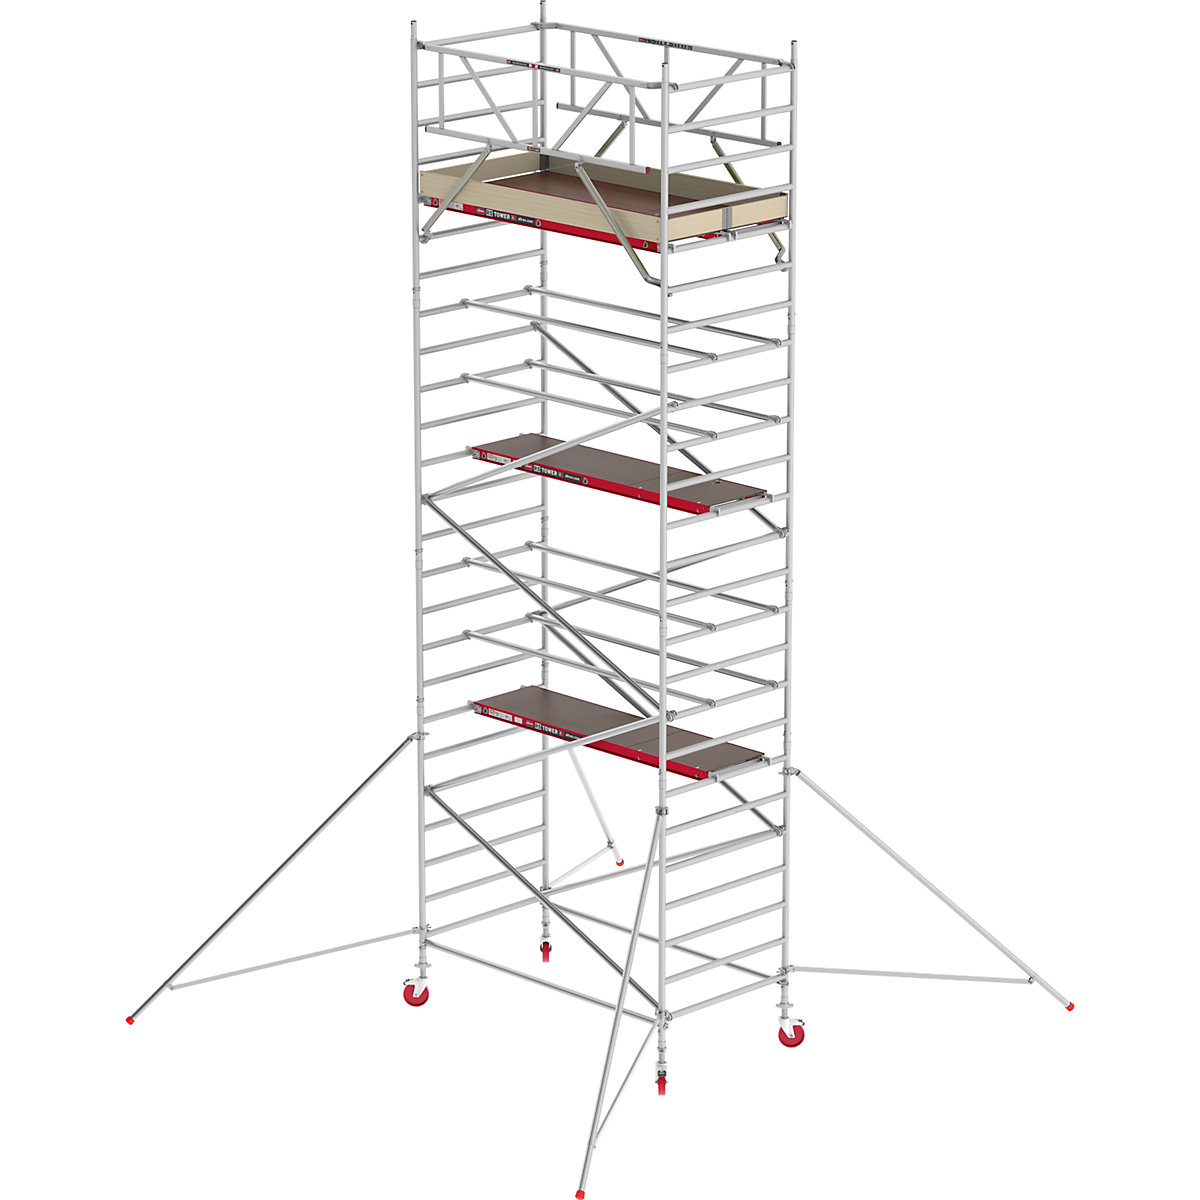 RS TOWER 42 wide mobile access tower – Altrex, wooden platform, length 1.85 m, working height 8.20 m-3